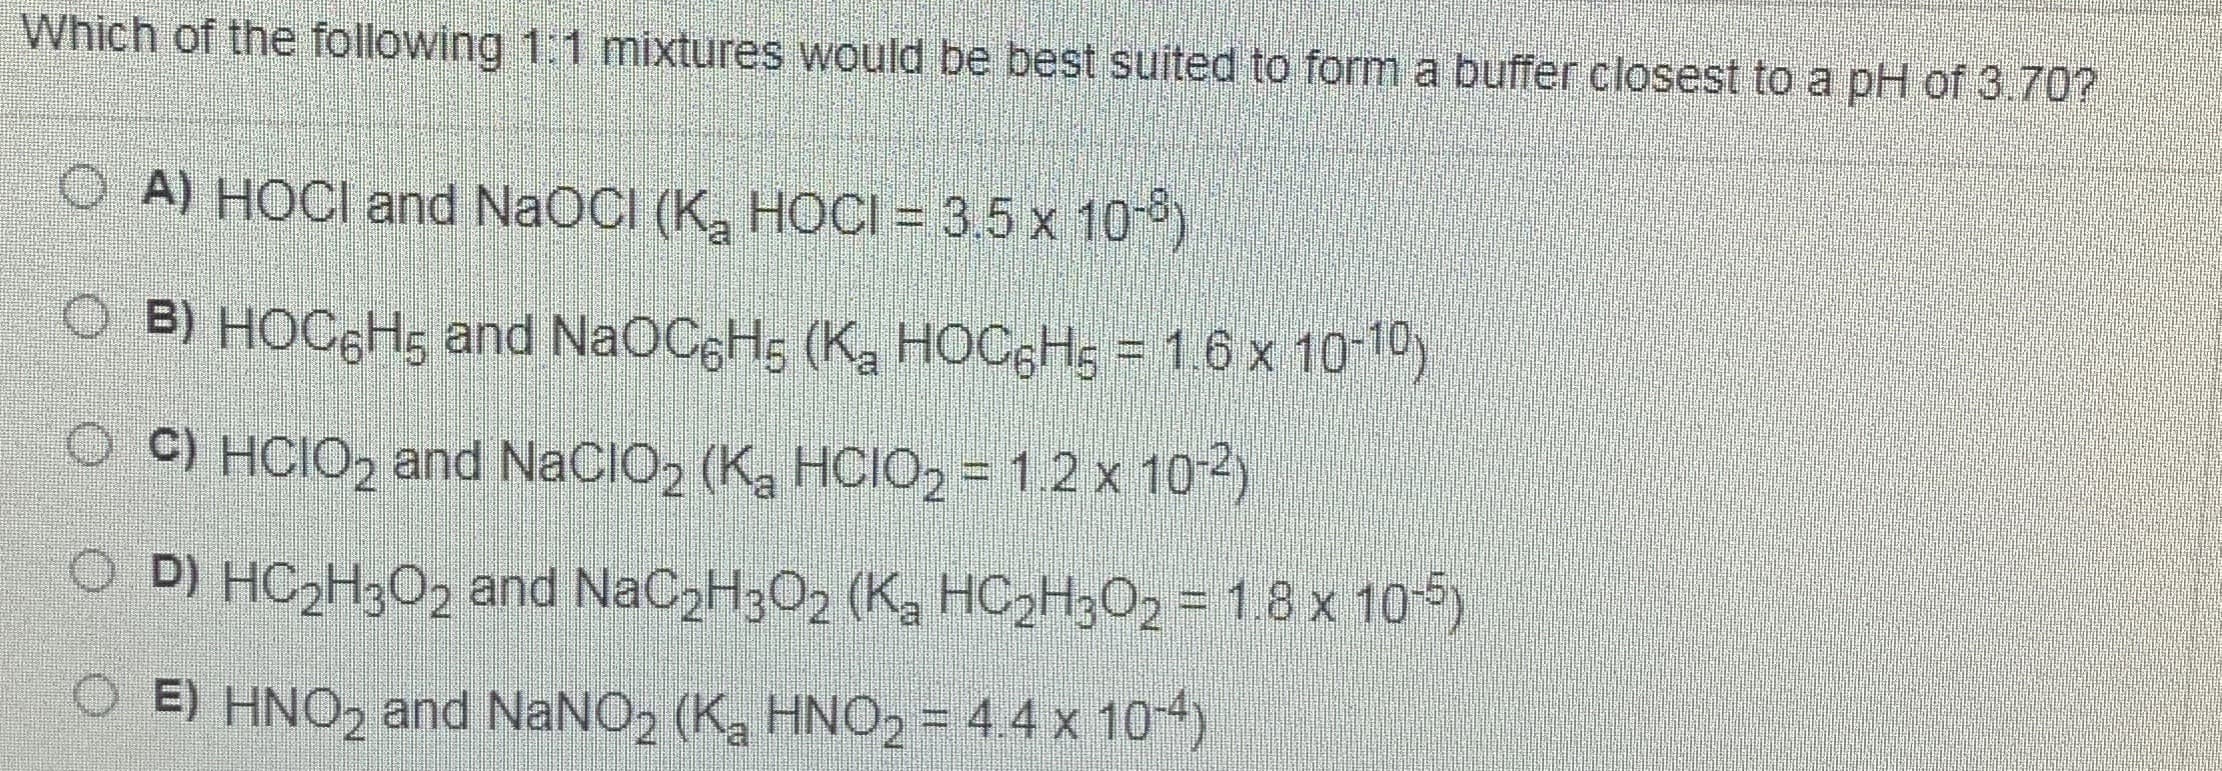 Which of the following 1:1 mixtures would be best suited to form a buffer closest to a pH of 3.70?
